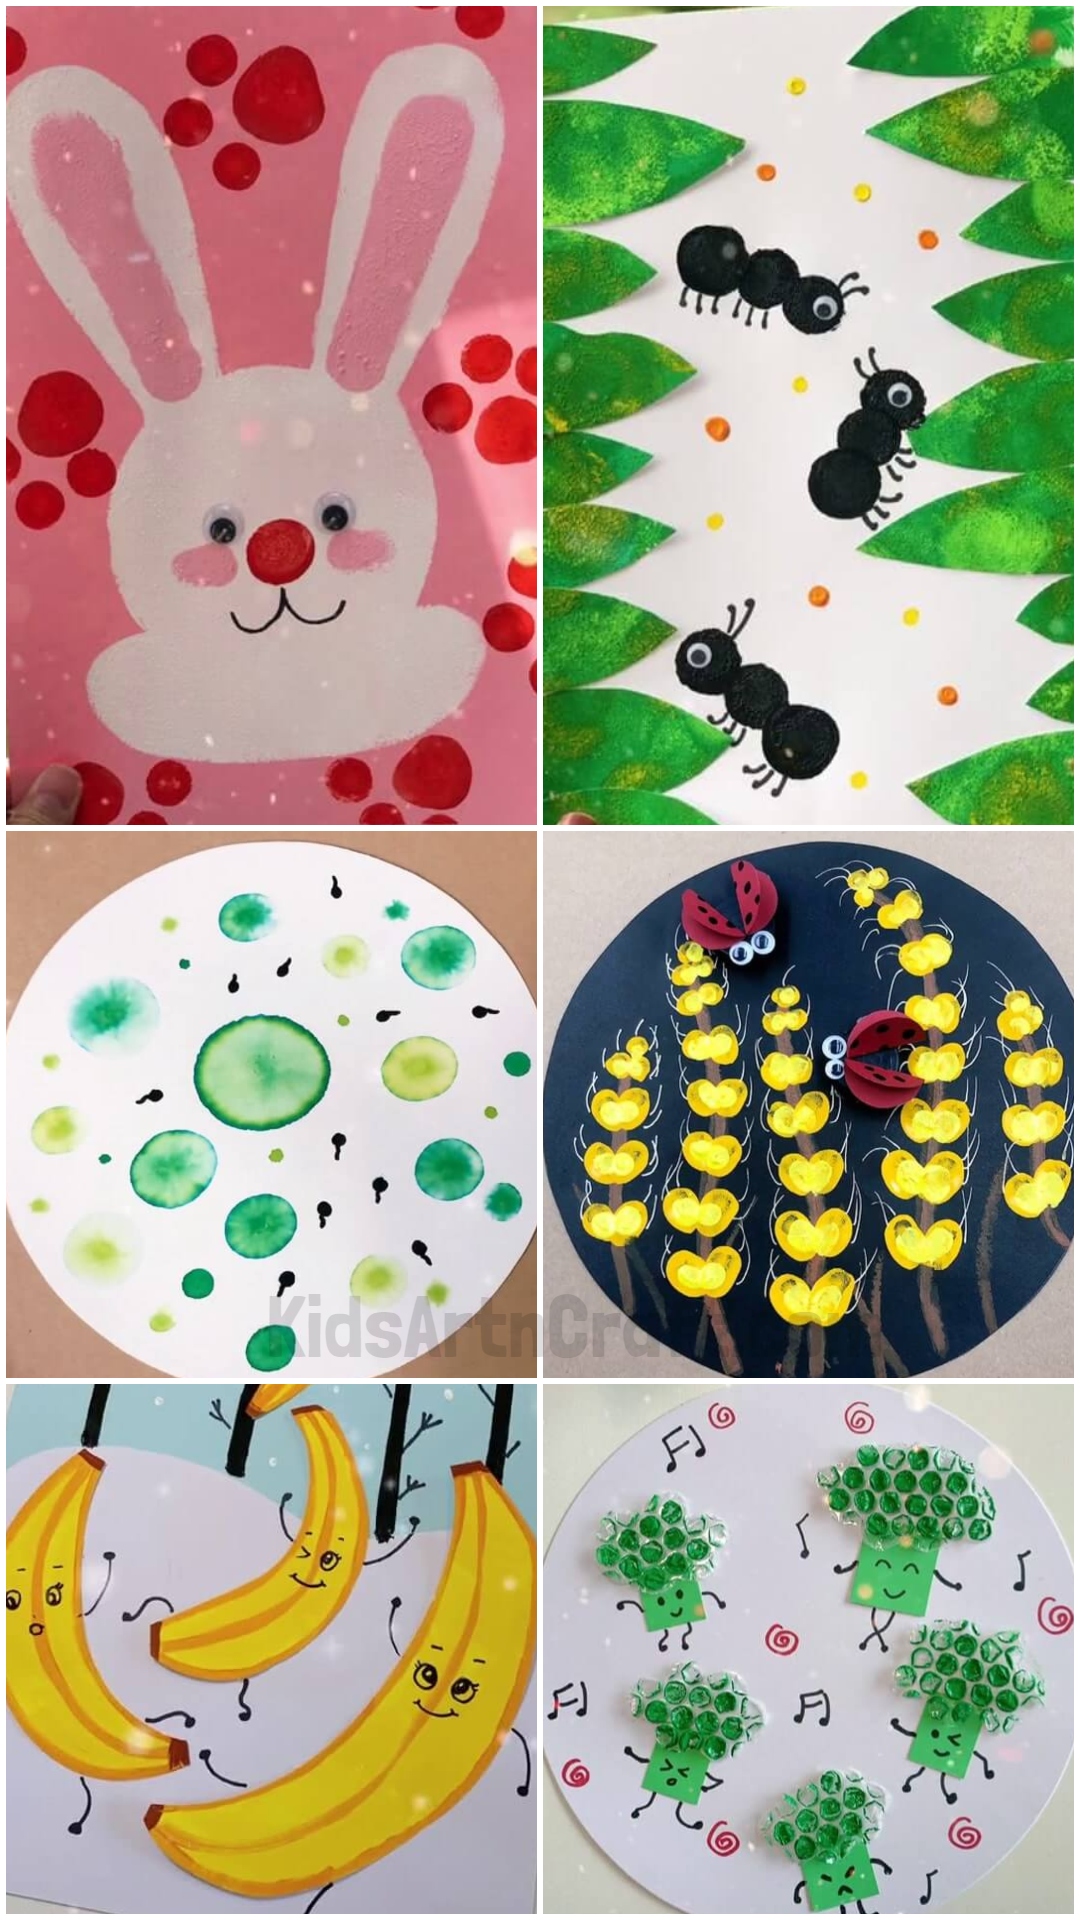 Funny Painting With Craft Ideas For Kids